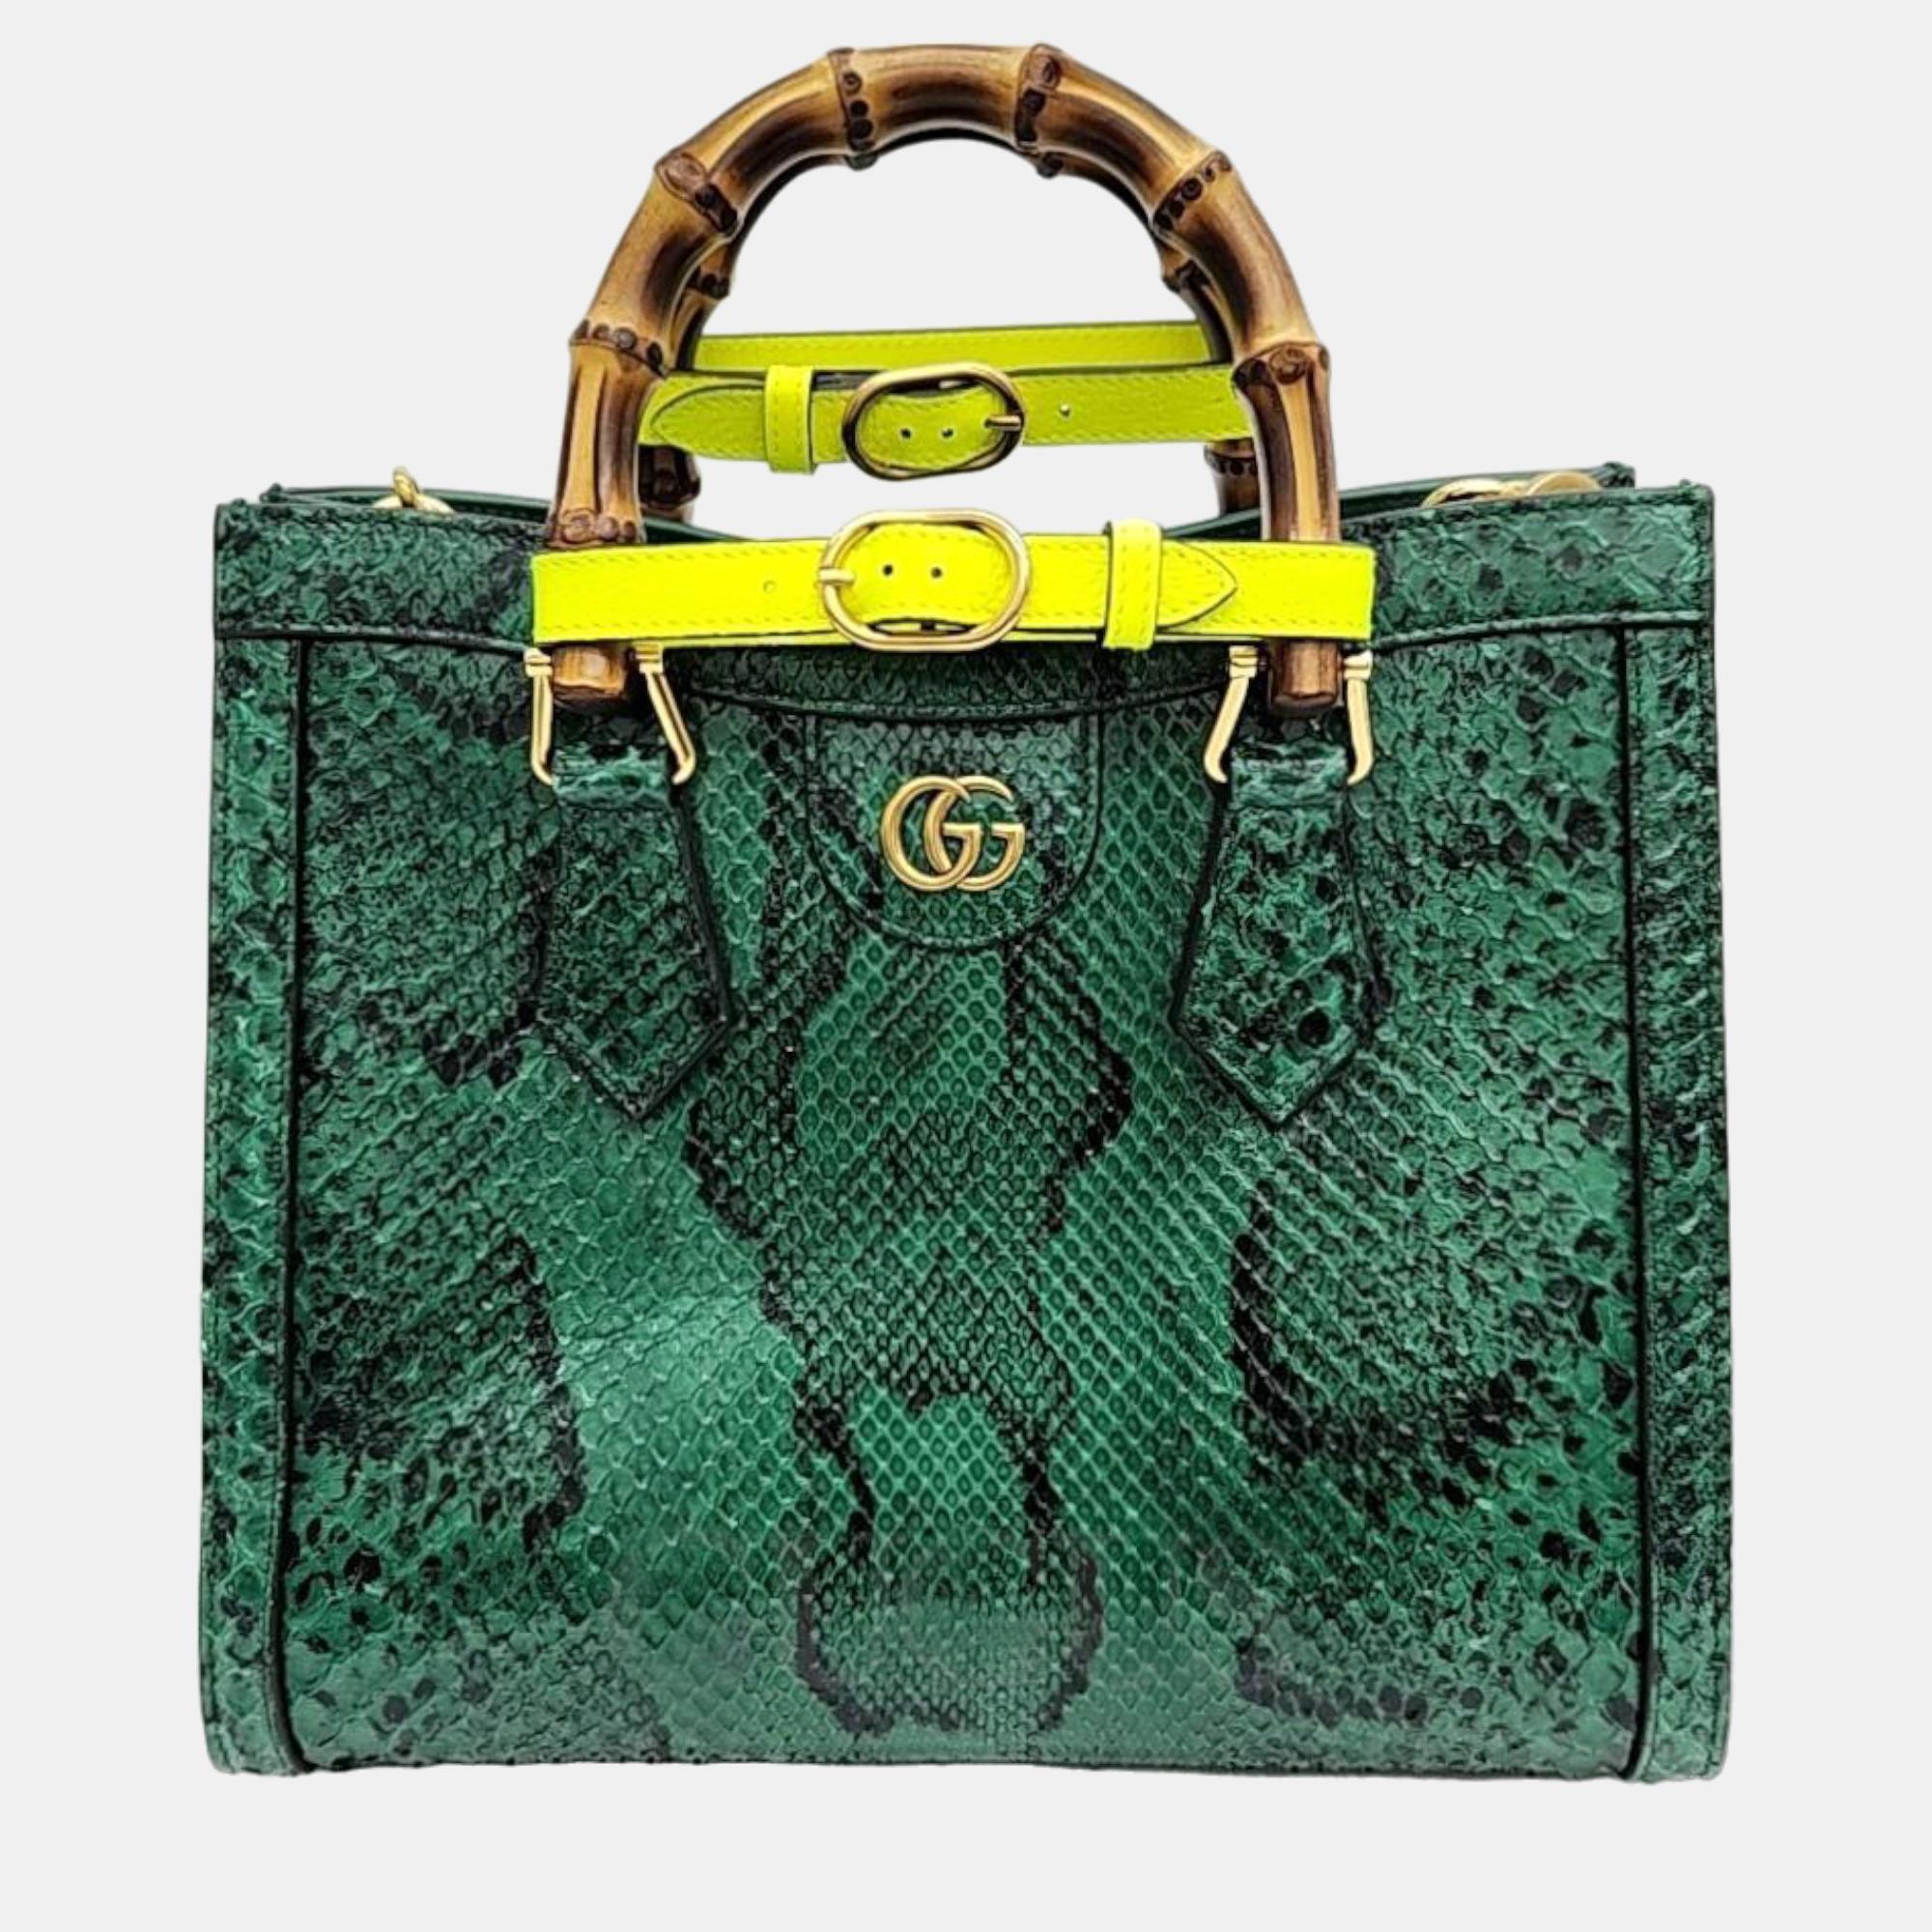 Gucci green python leather small diana tote bag